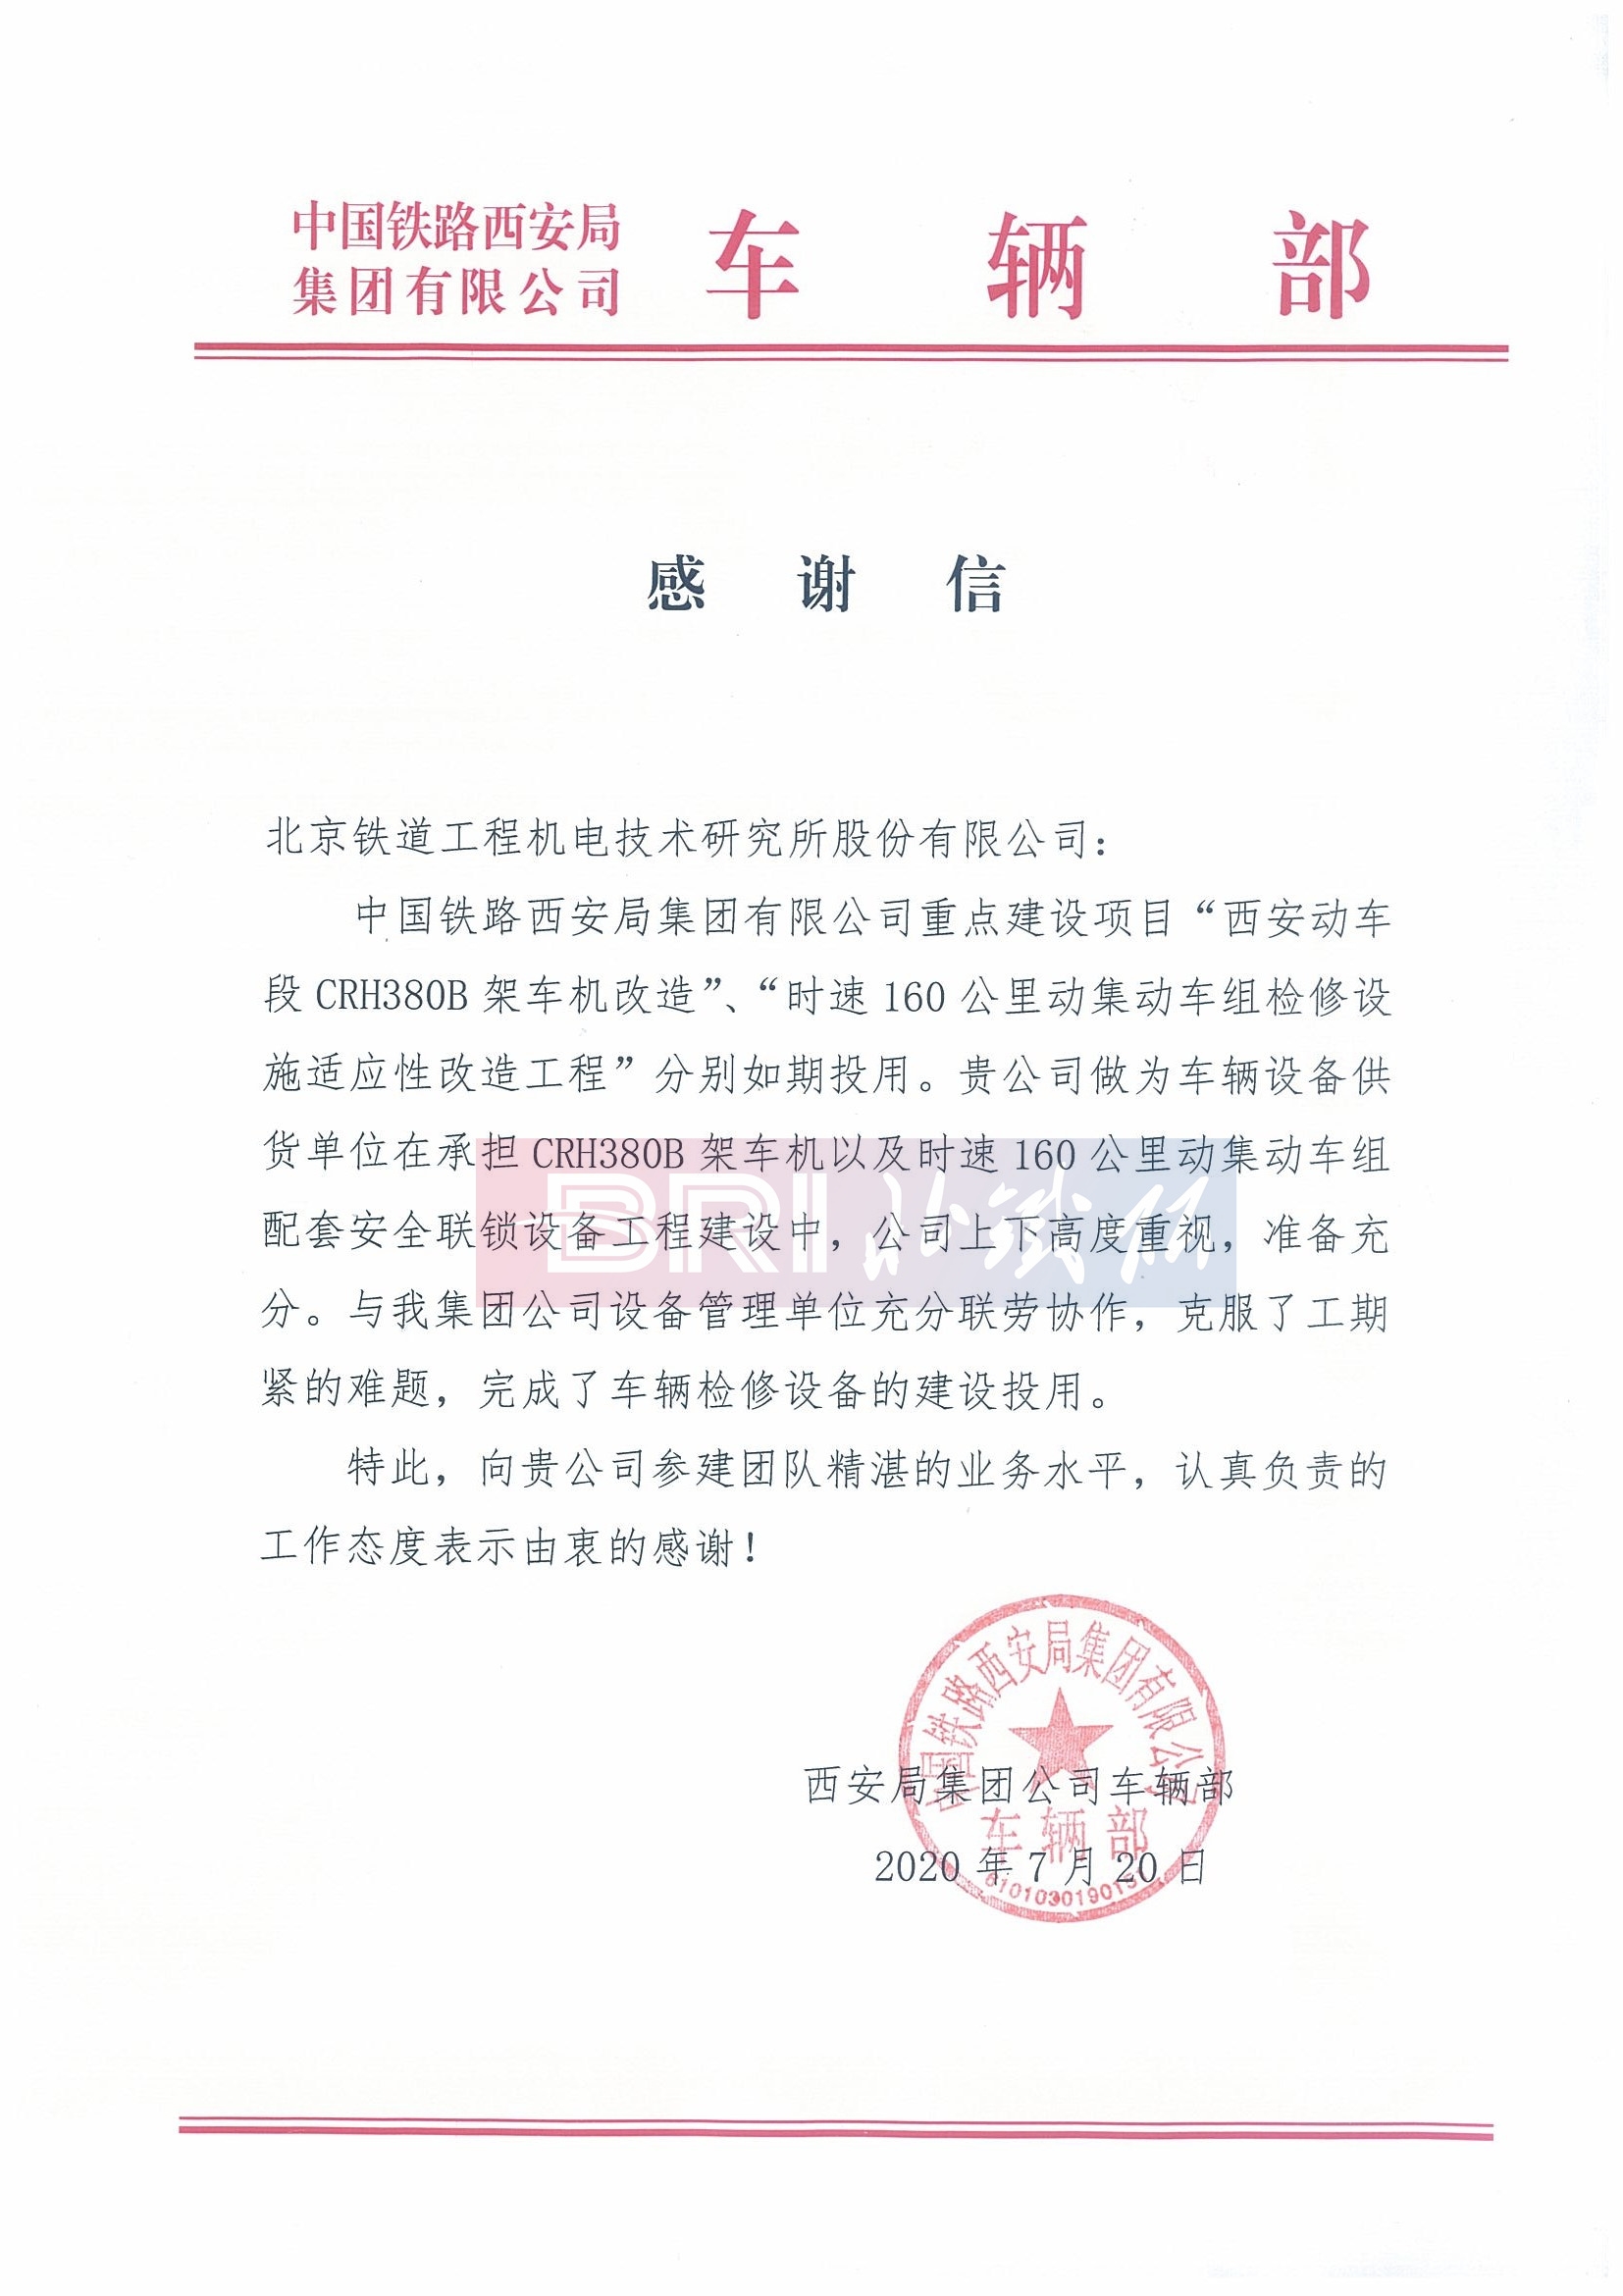 The thank you Letter from Vehicle Department of China Railway Xian Group Co., Ltd